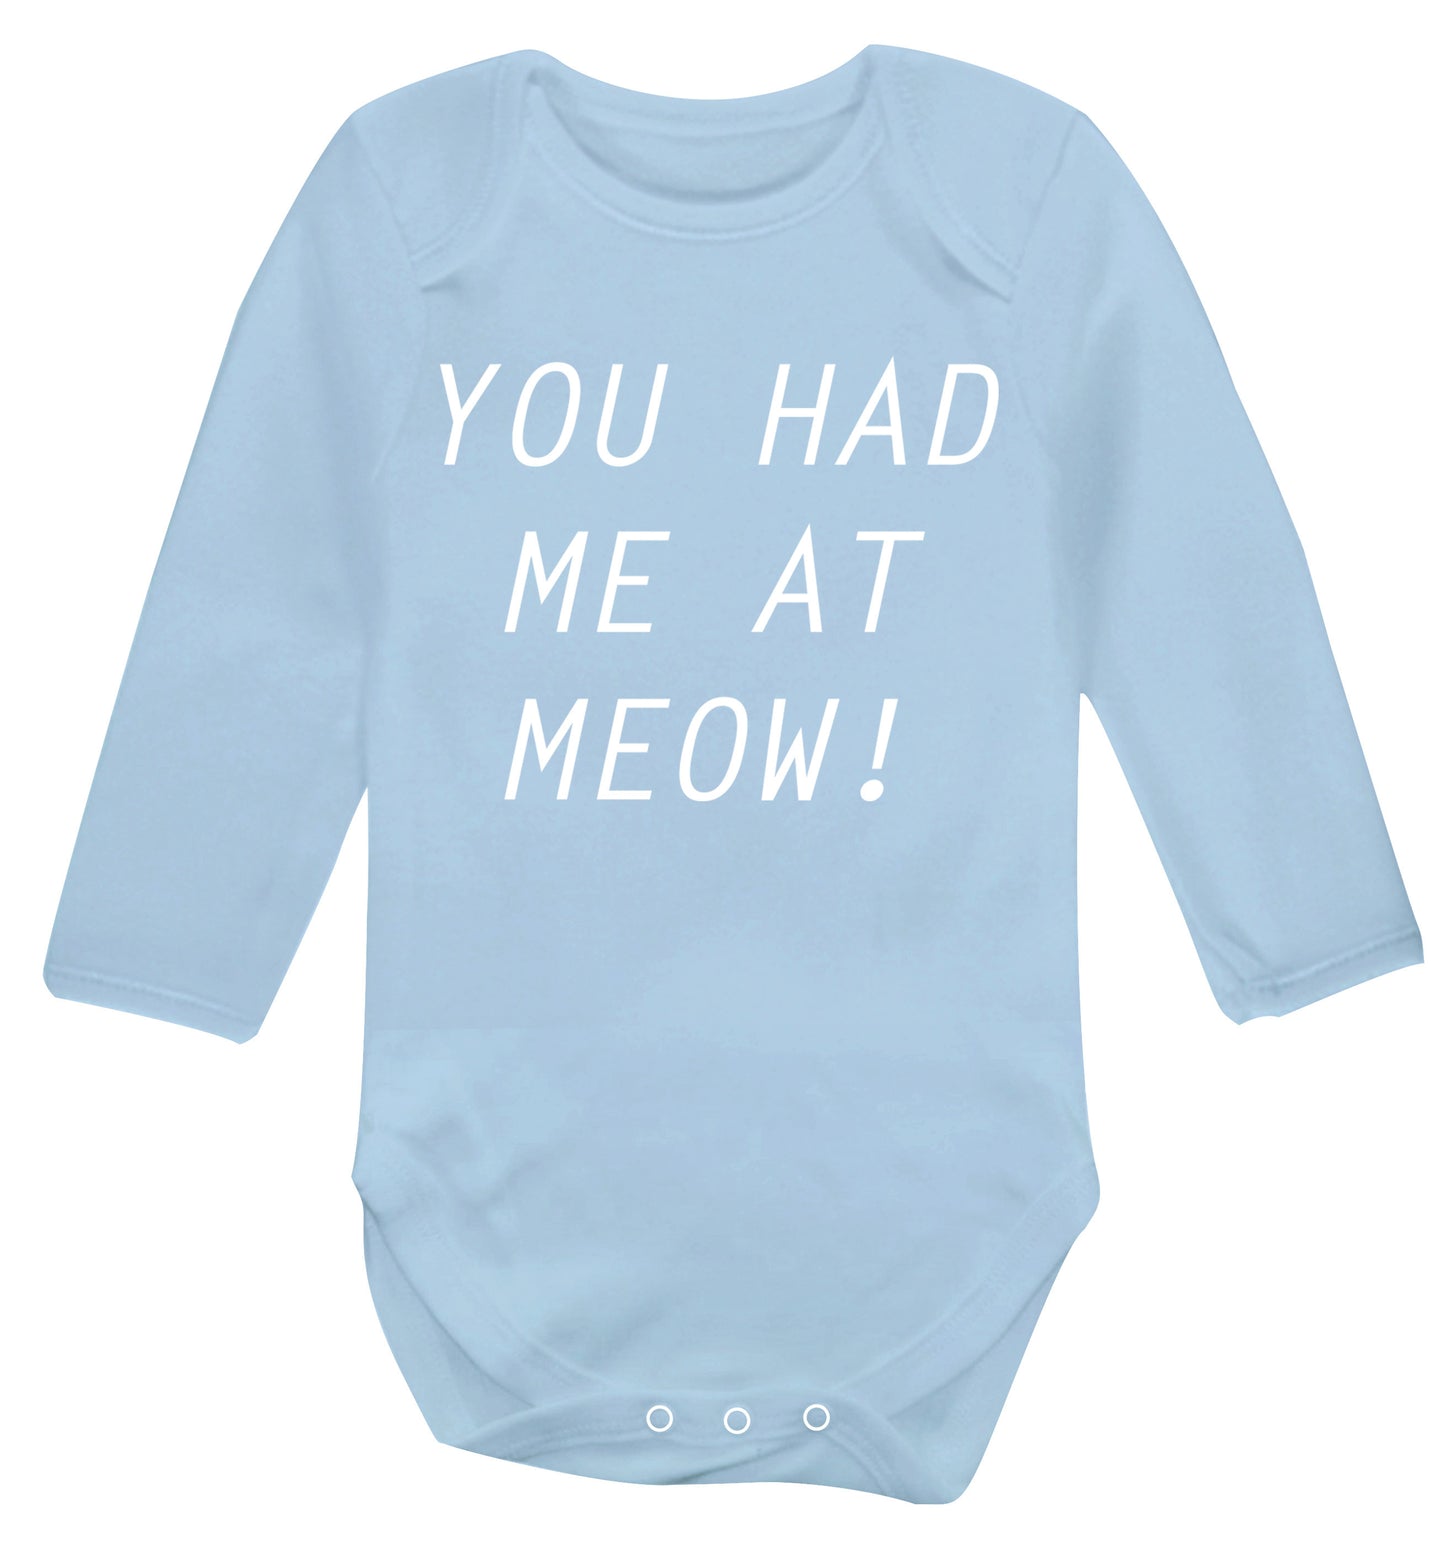 You had me at meow Baby Vest long sleeved pale blue 6-12 months